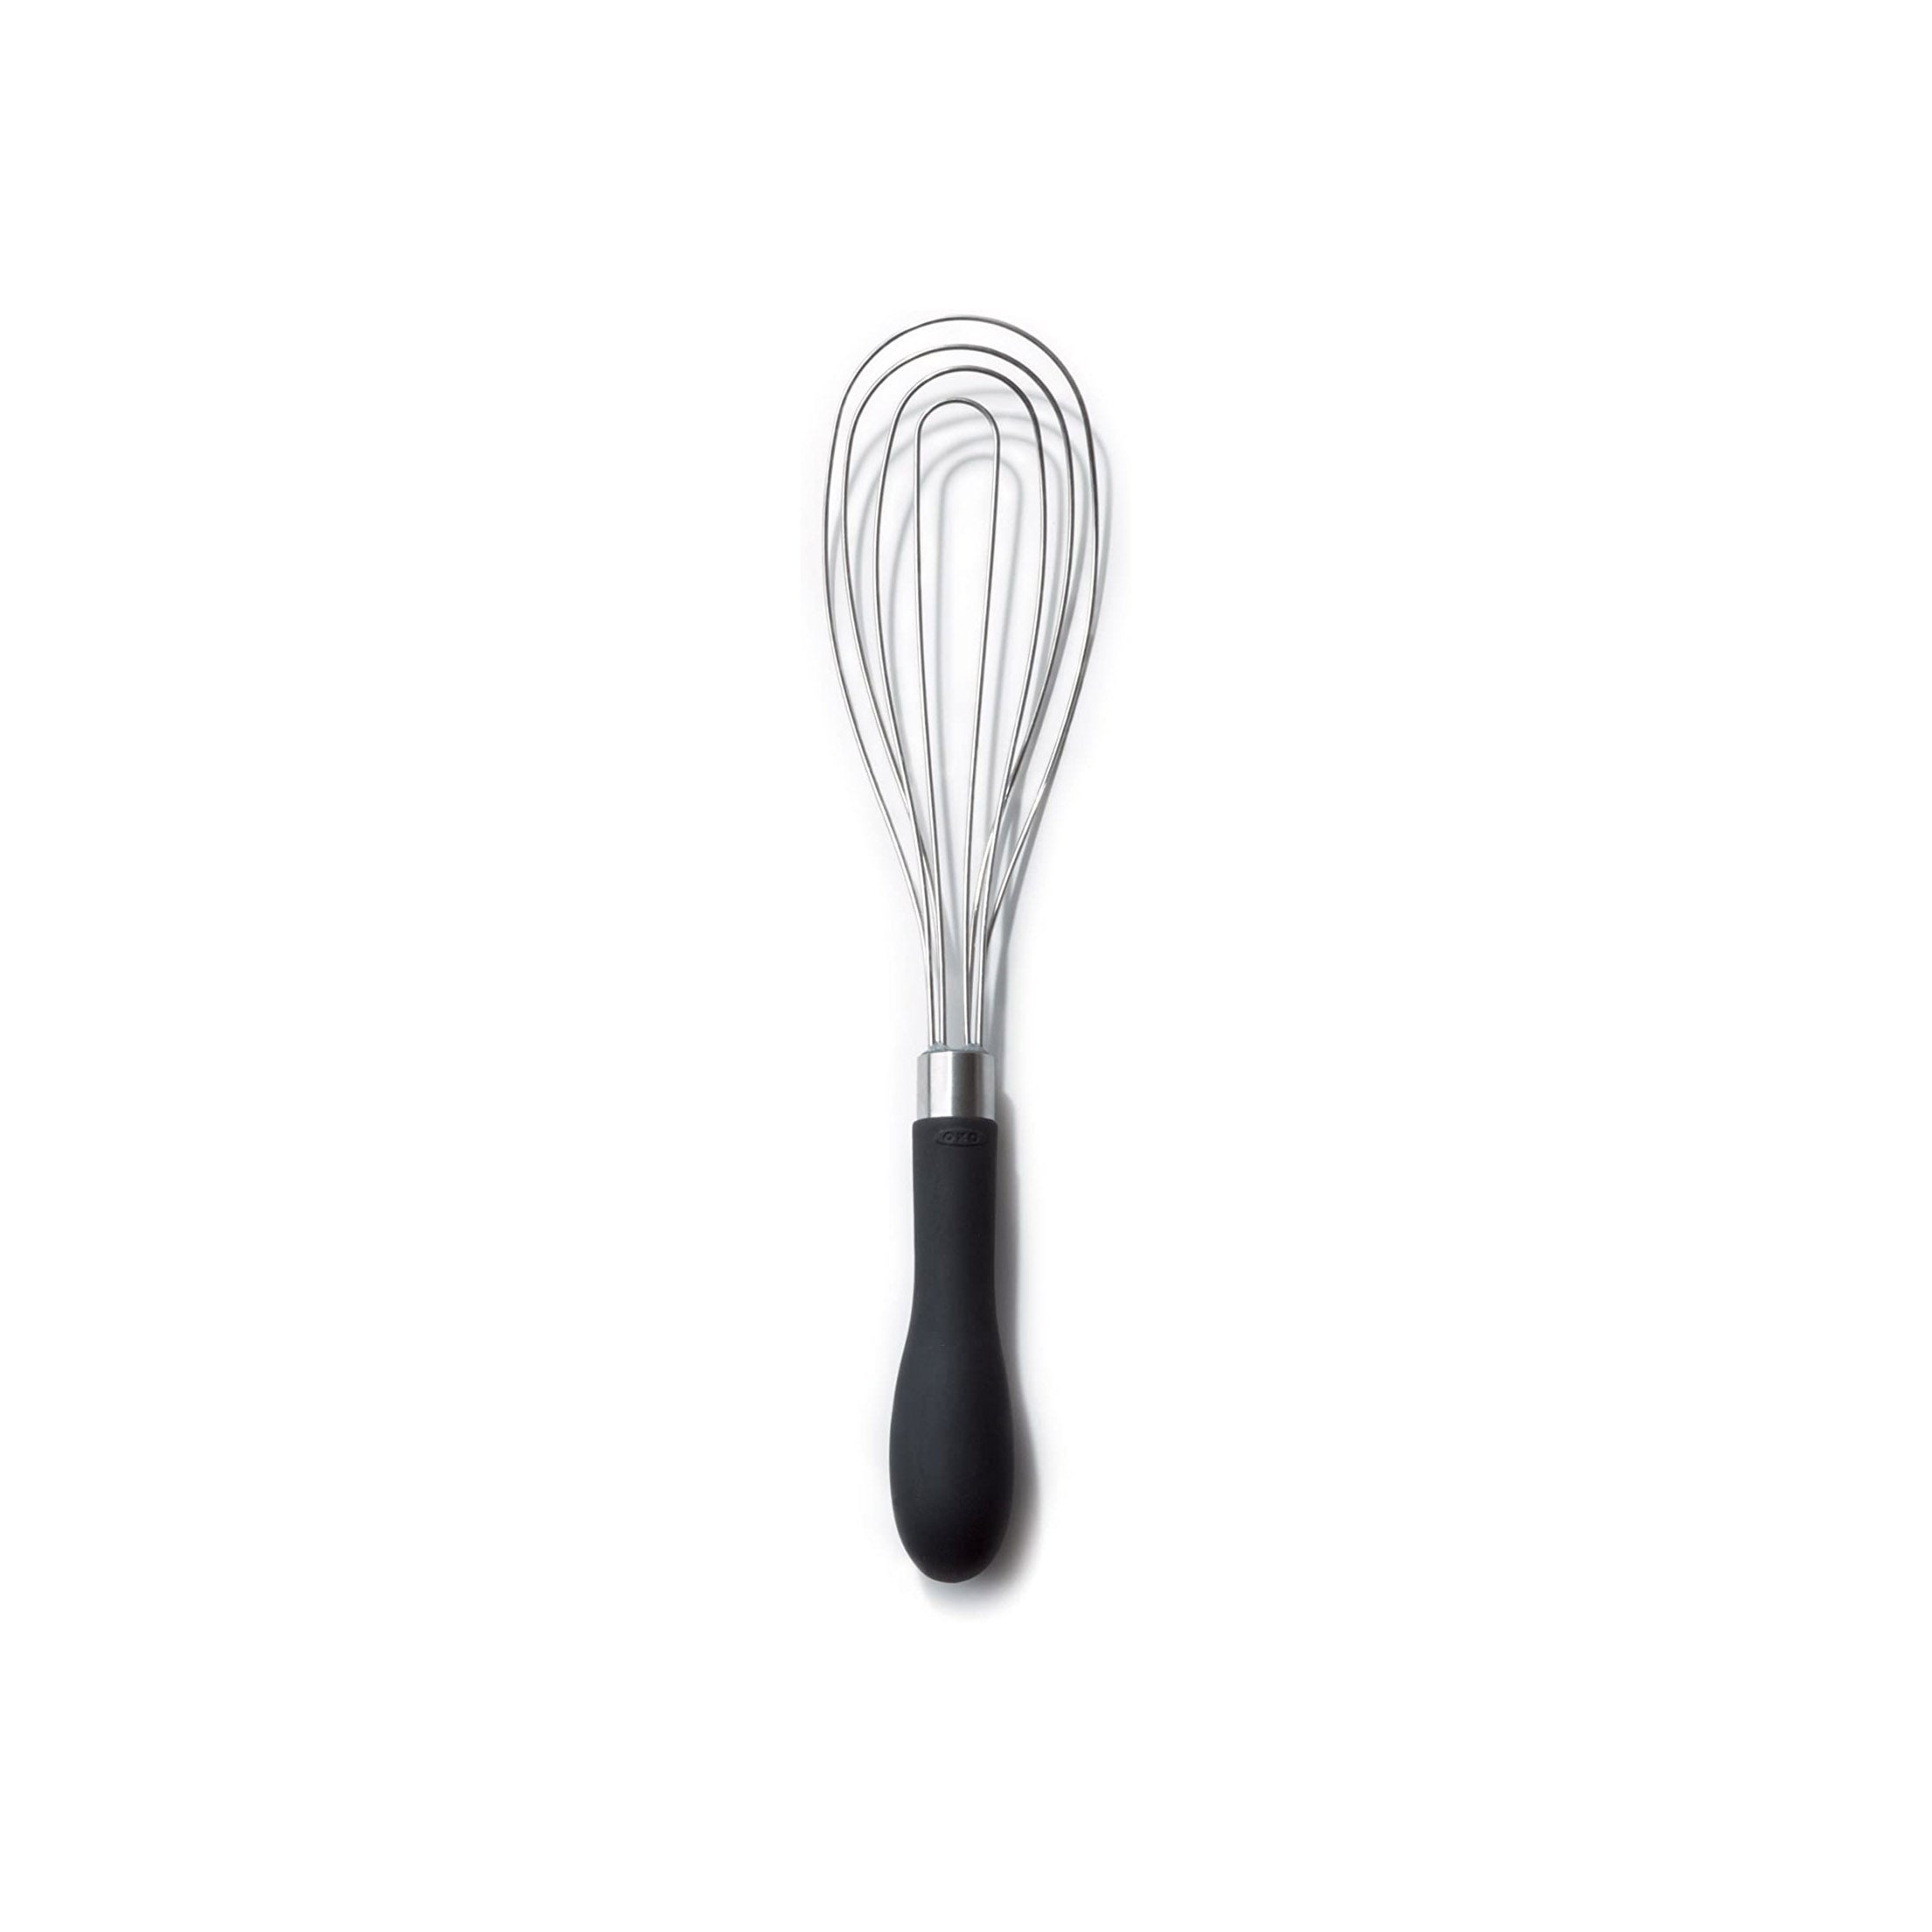  Best Manufacturers Inc. 12-FL Whisk, Inch, Stainless